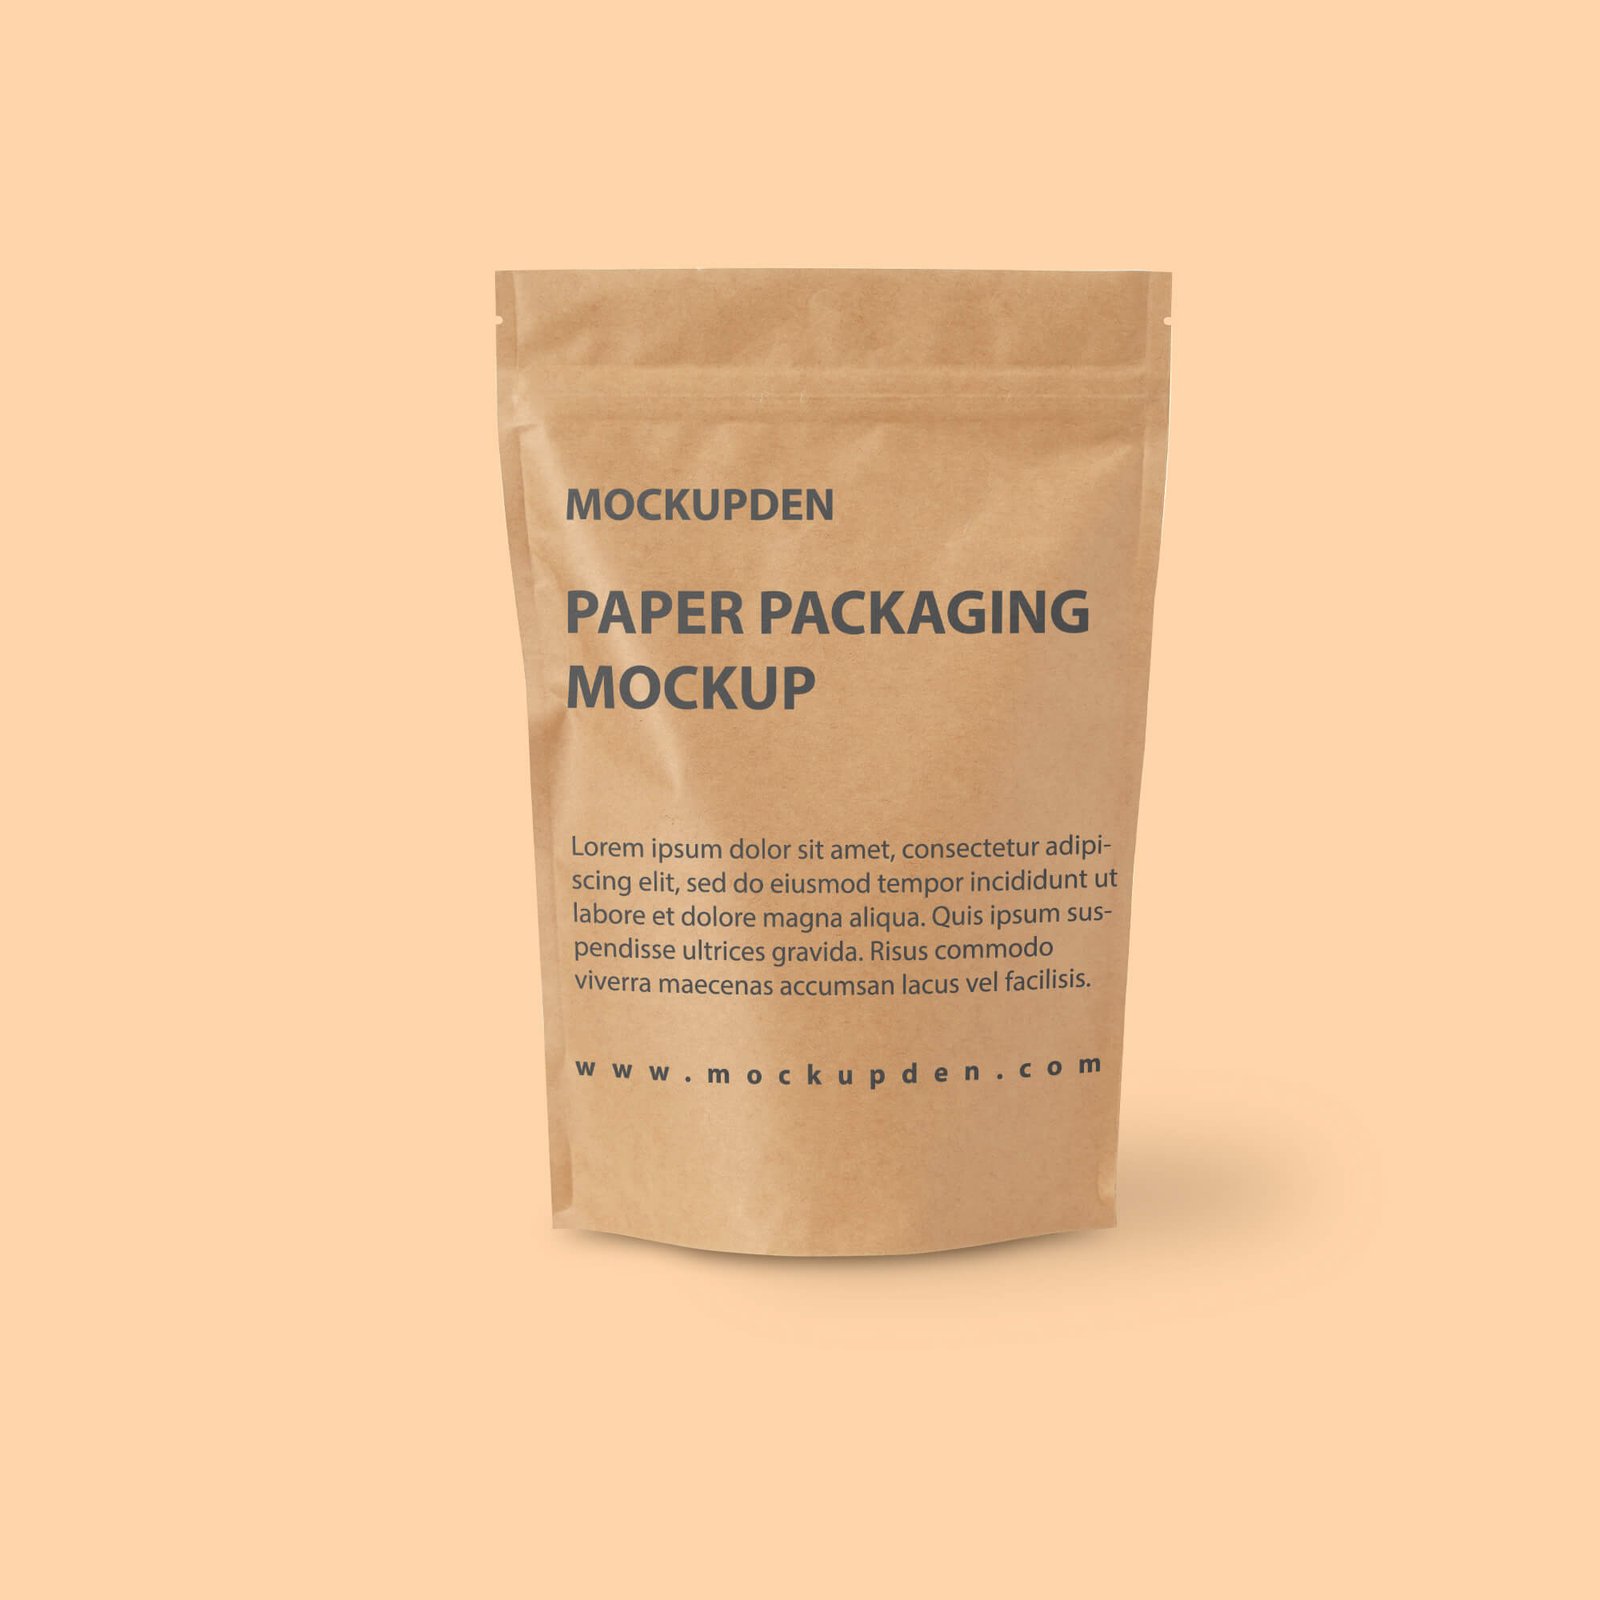 Design Free Paper Packaging Mockup PSD Template